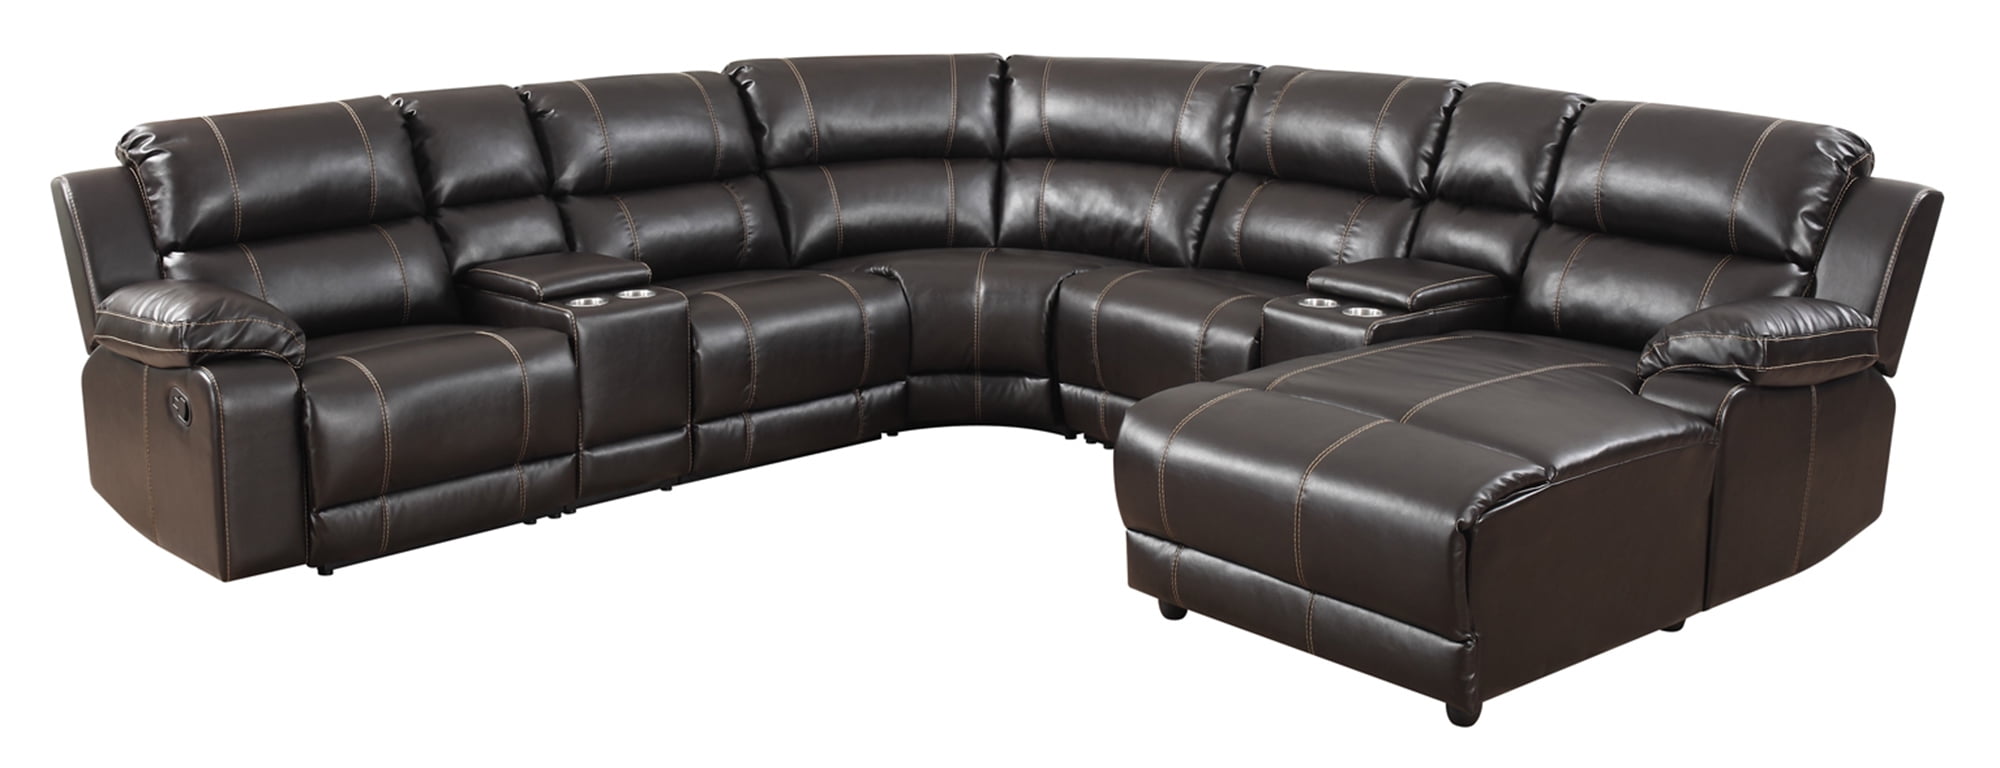 darrin leather reclining sofa with console